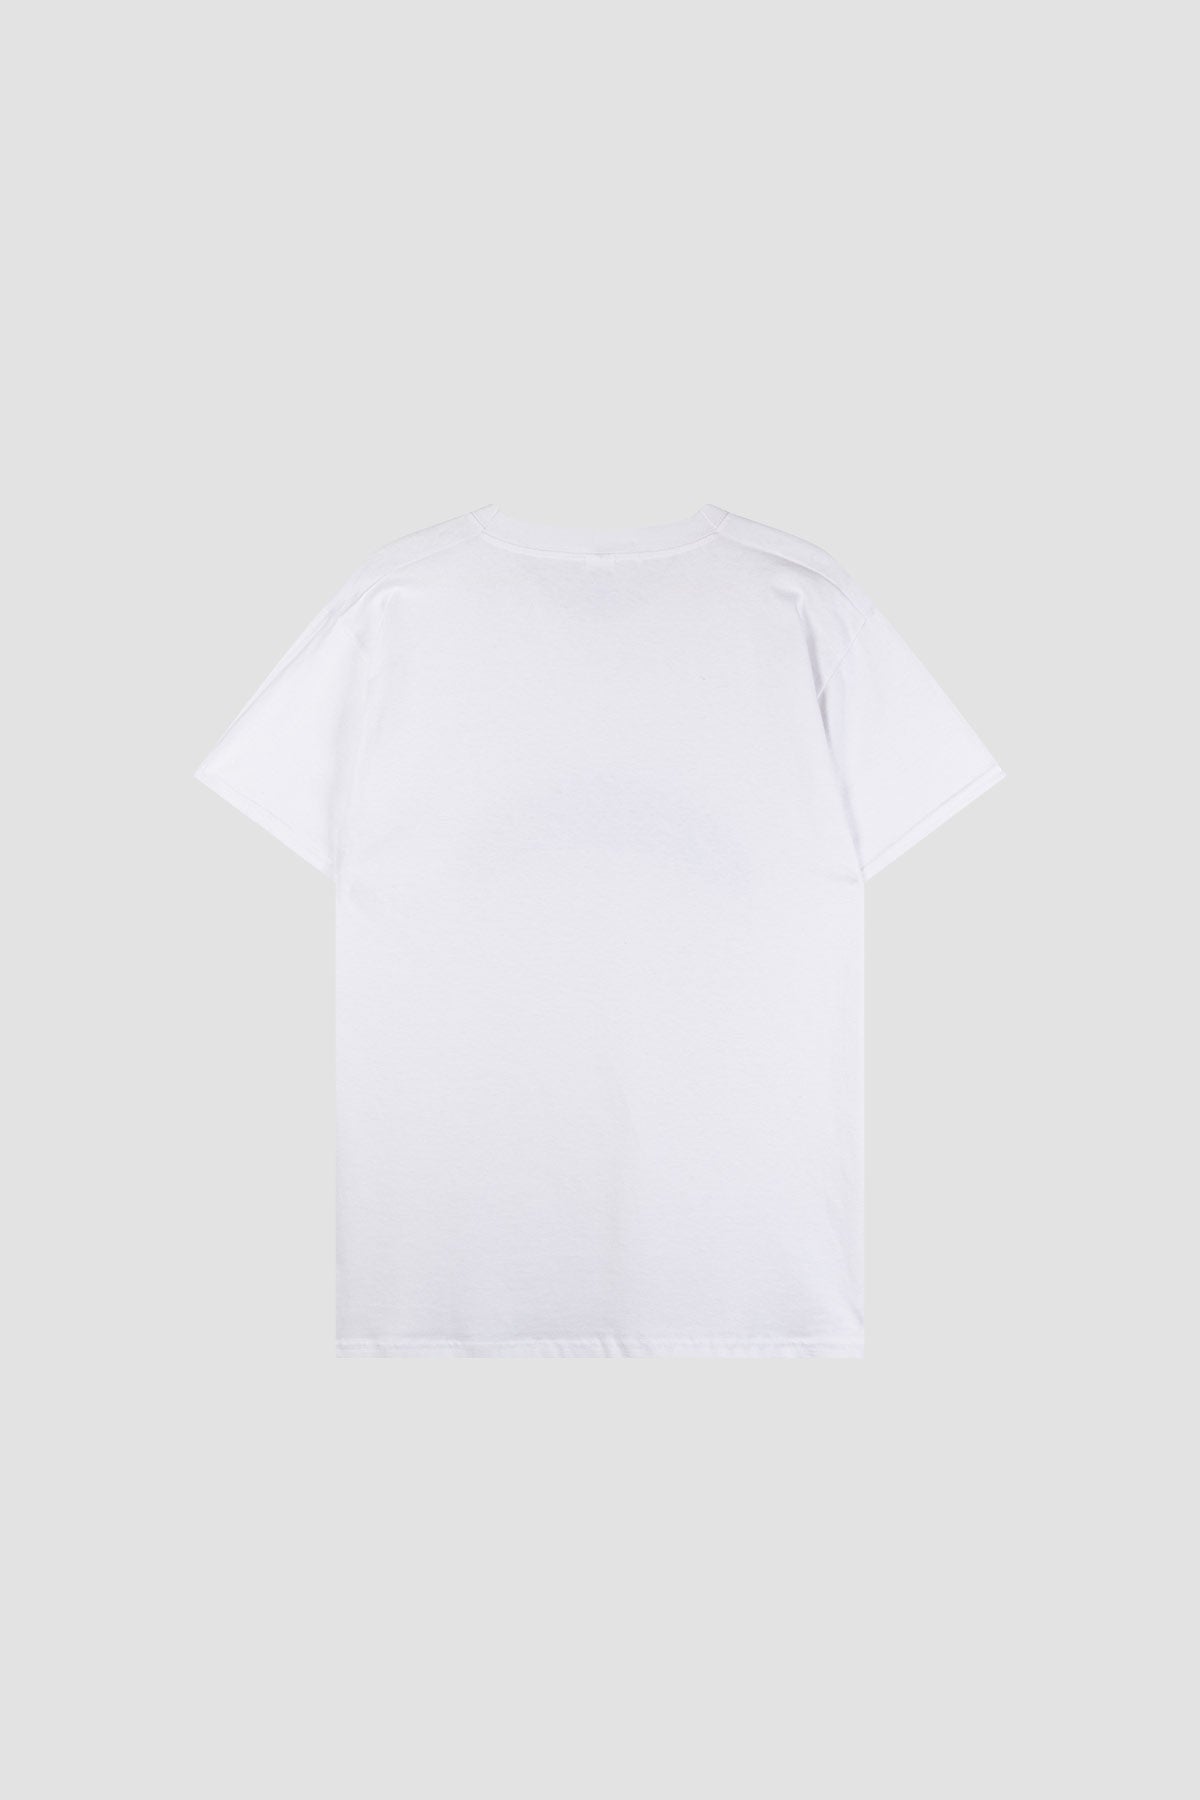 ARCH WHITE STORM TEE